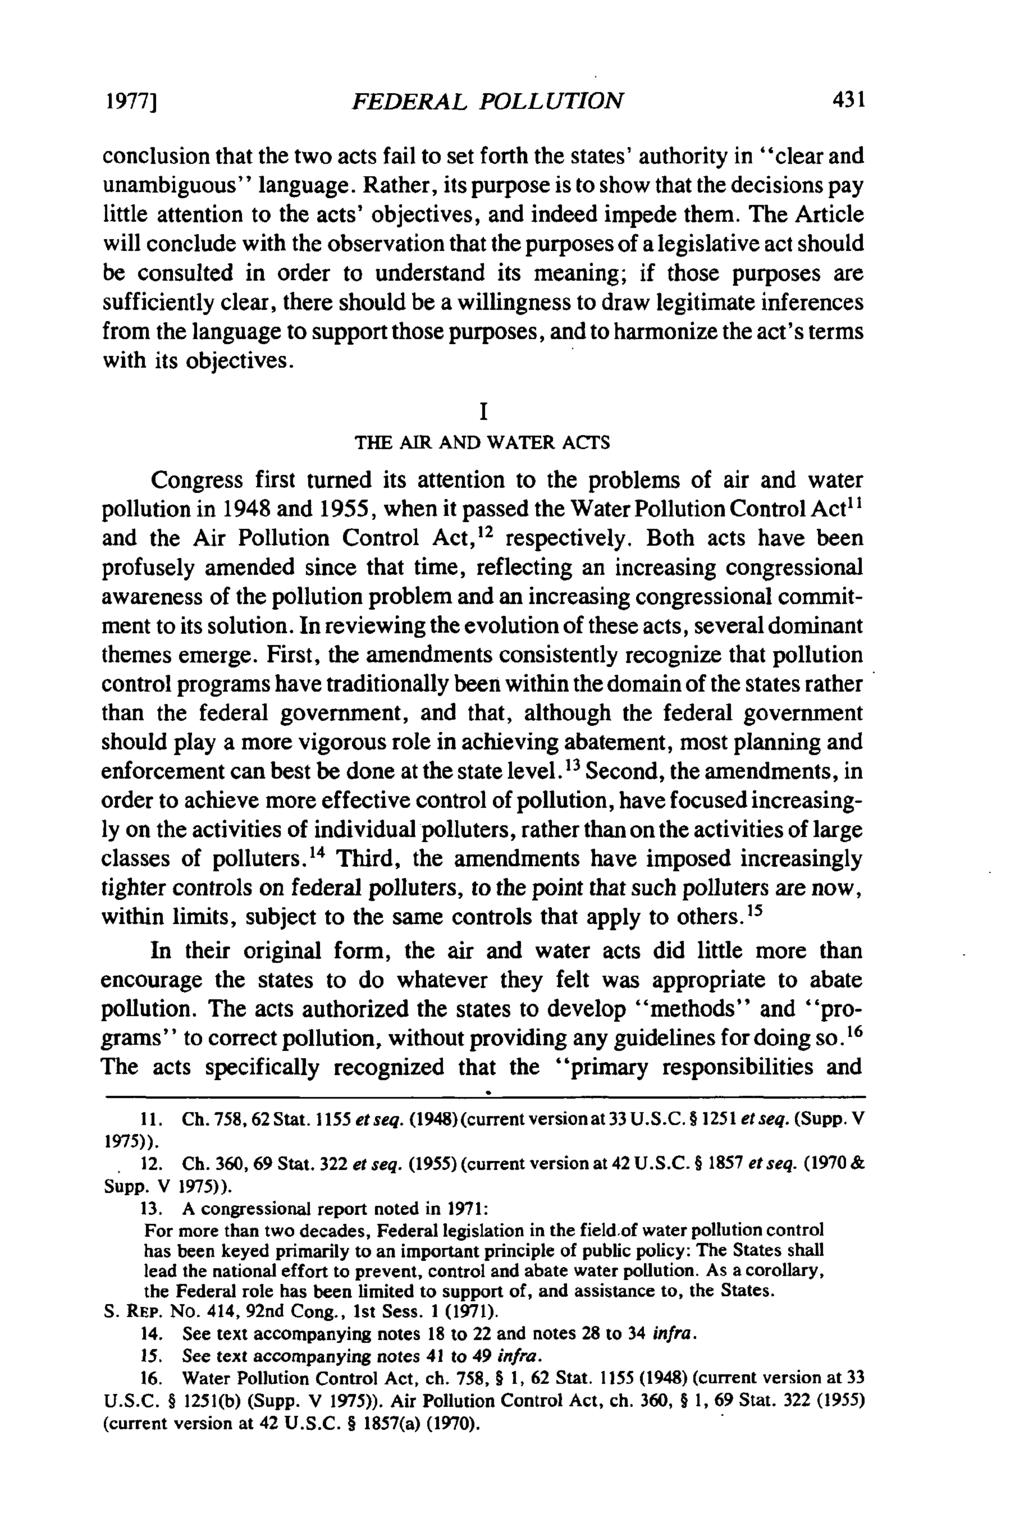 1977] FEDERAL POLLUTION conclusion that the two acts fail to set forth the states' authority in "clear and unambiguous" language.